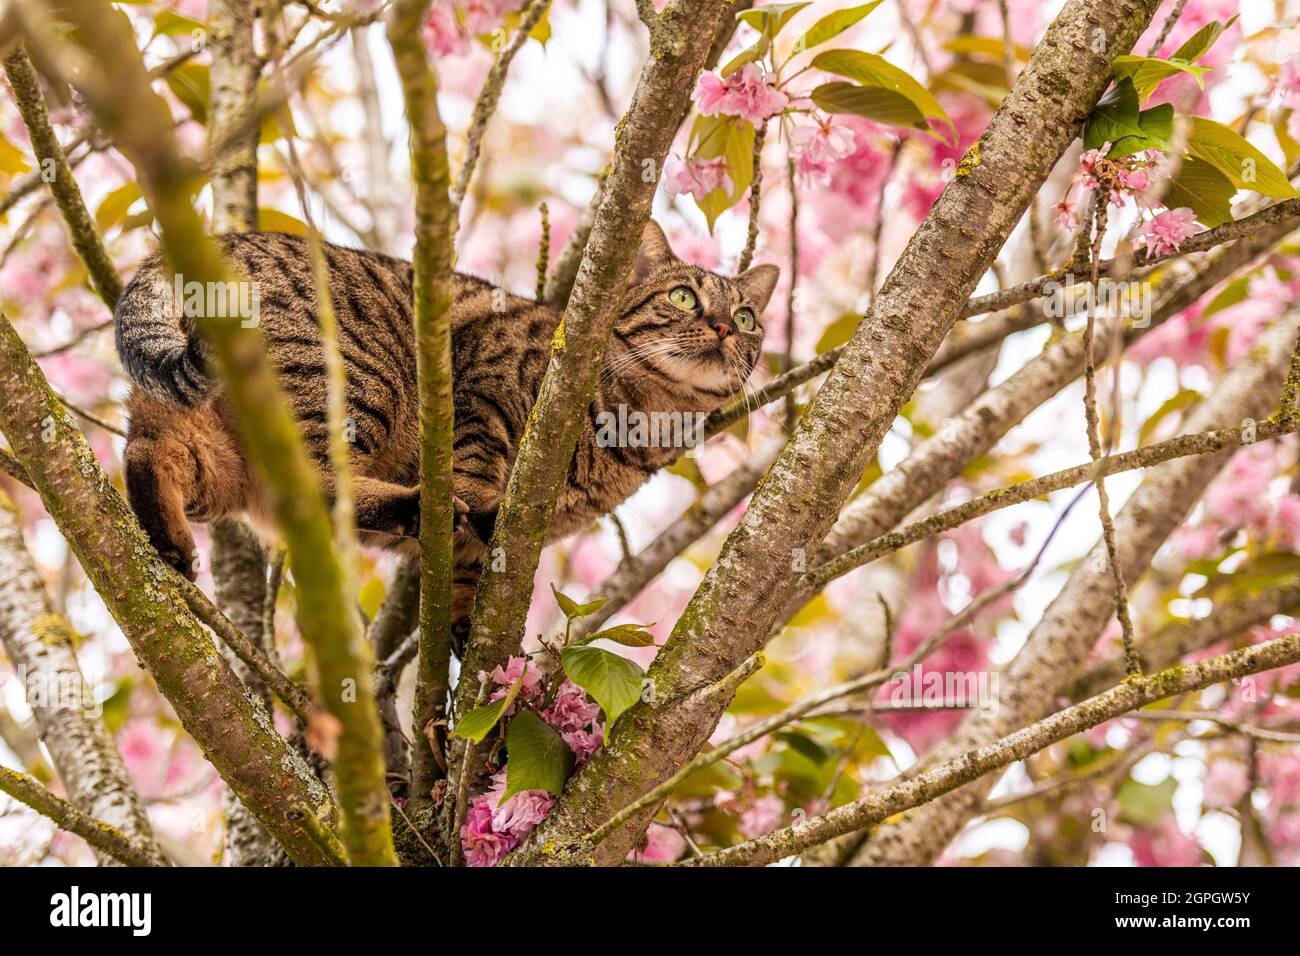 France, Somme, Marcheville, The cat Minette climbed in a prunus to try to catch the birds Stock Photo